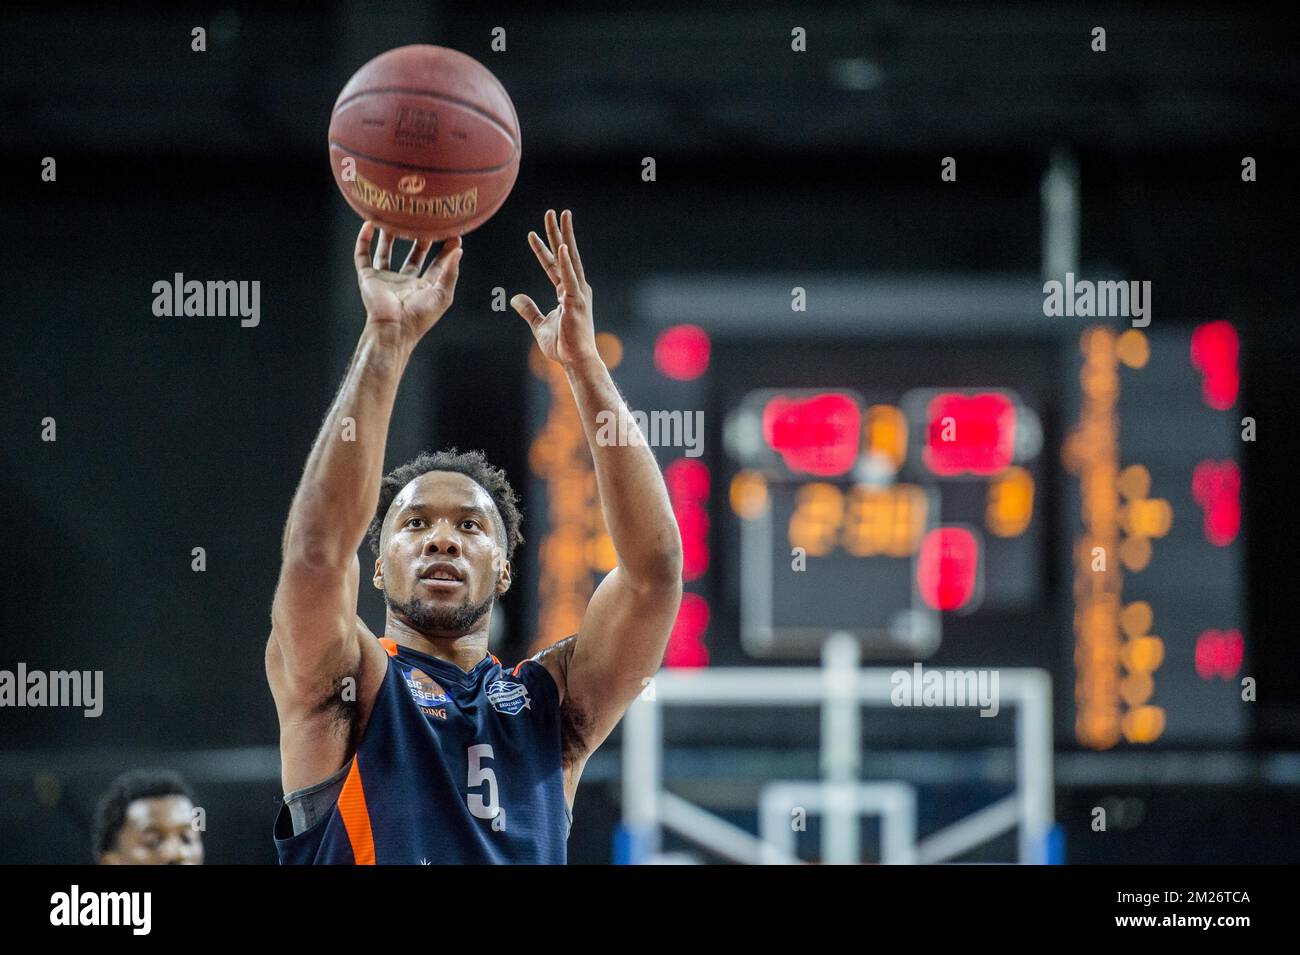 Brussels' Chris Dowe throws a free throw during the basketball game between  Port of Antwerp Giants and Basic-Fit Brussels, on day 33 of the  EuroMillions League basket competition, on Sunday 30 April